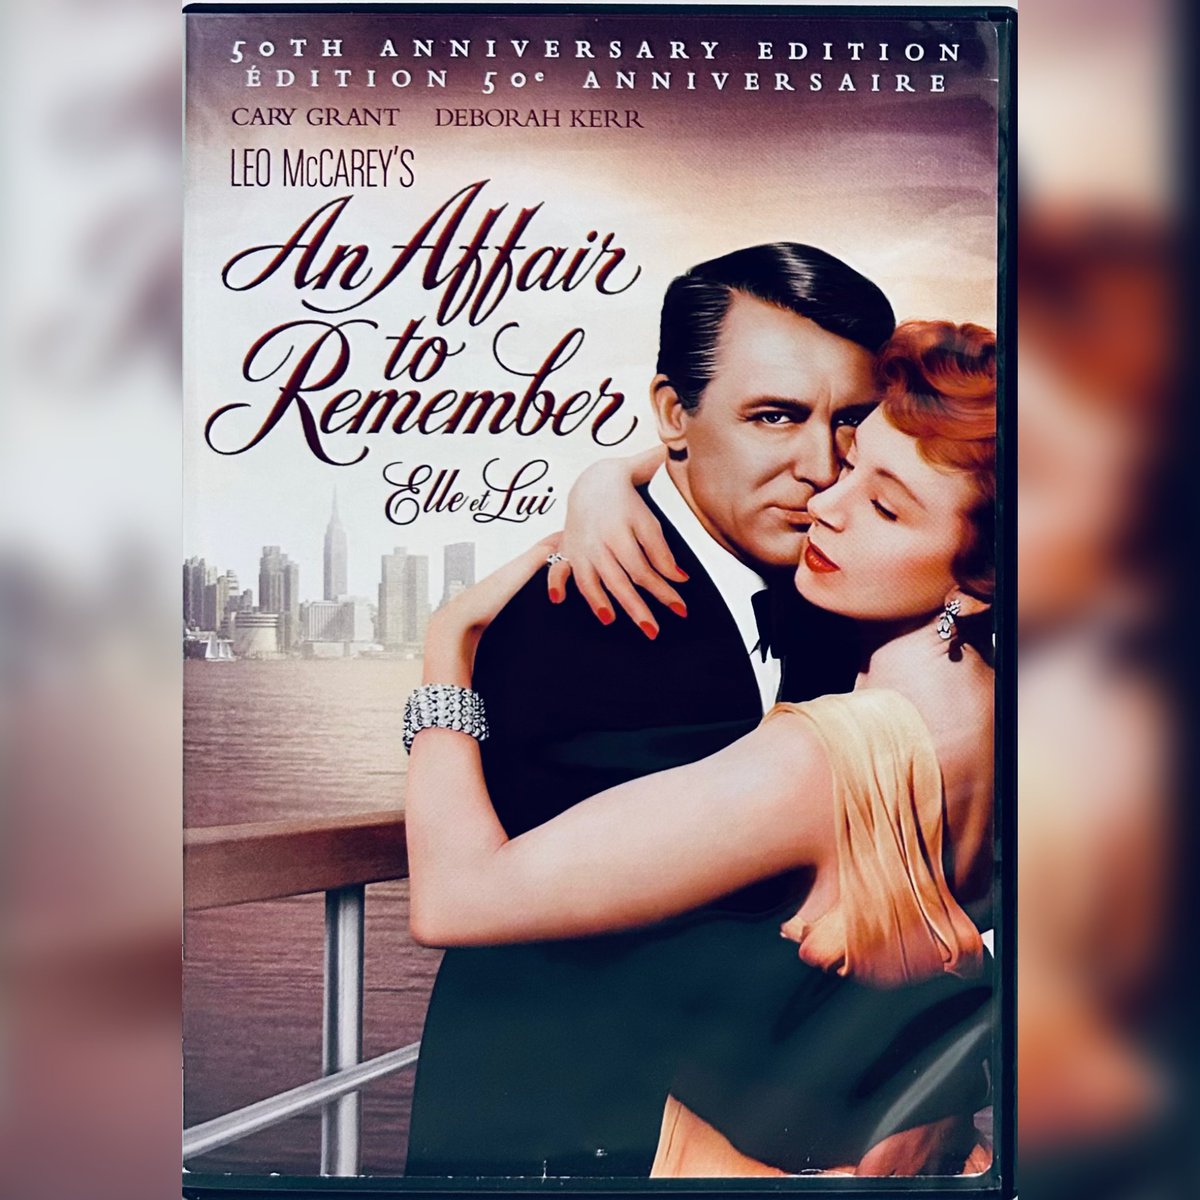 #NewArrival! An Affair to Remember (DVD 1957) w/ Lobby Cards 2-Disc Set 50th Anniversary 

rareflicksplus.com/product-page/a…

#checkitout #AnAffairtoRemember #50s #LobbyCards #AnniversaryEdition #Romance #DVD #DVDs #PhysicalMedia #Flashback #DvdWebsite #DvdStore #CaryGrant